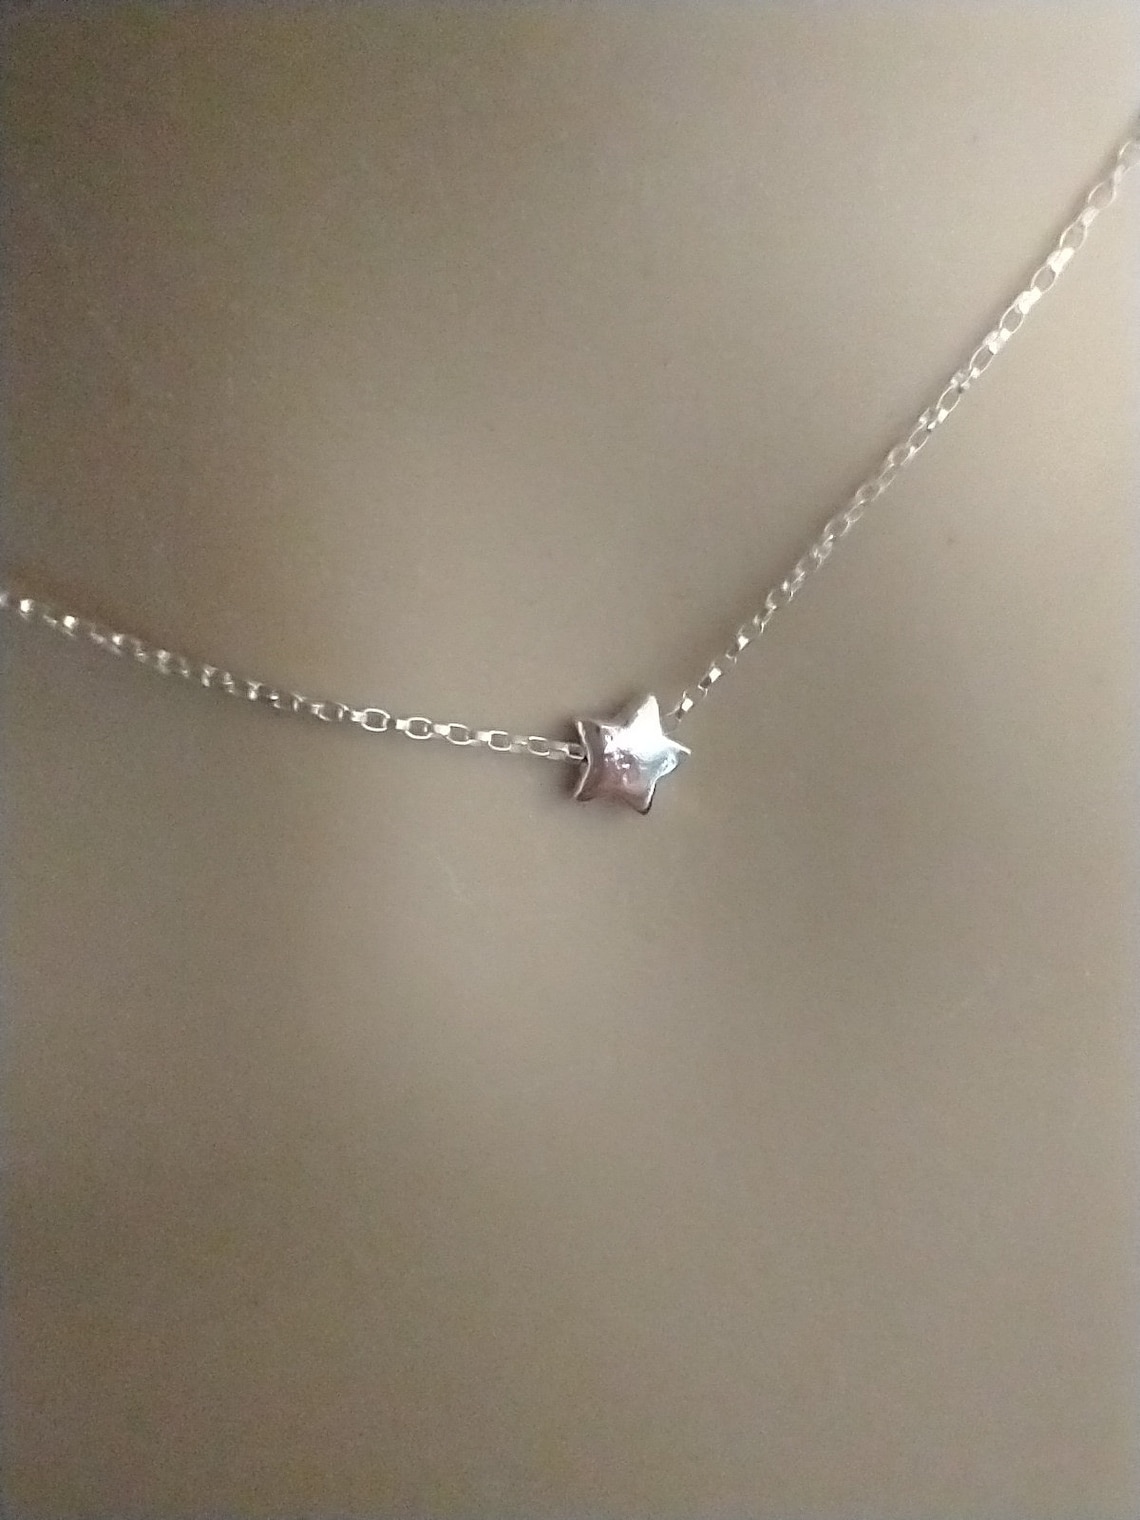 SALE Tiny Sterling Silver Star Necklace Silver Star Jewelry | Etsy